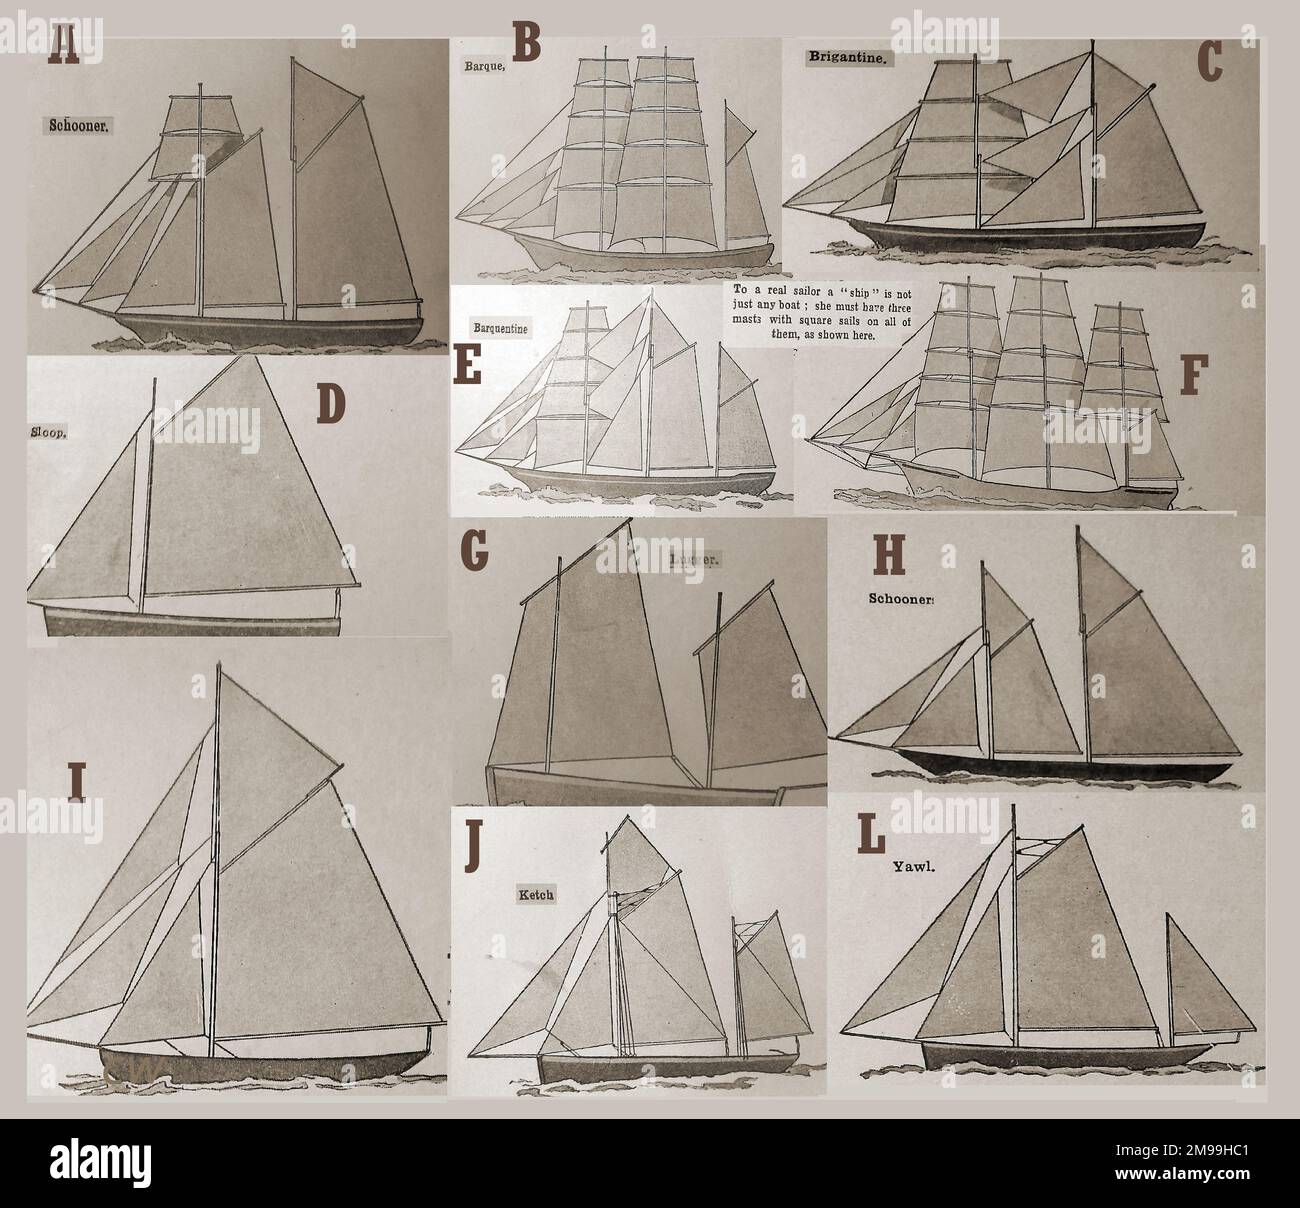 A 1930's scrapbook pastiche showing the different types of rigging on British ships and boats. A  Schooner (square top-sail), B Barque, C Brigantine, D Sloop, E Barquentine, F Ship rigged, G Lugger,  H Schooner (fore & aft rigged),  I   Cutter  , J Ketch,  Yawl Stock Photo